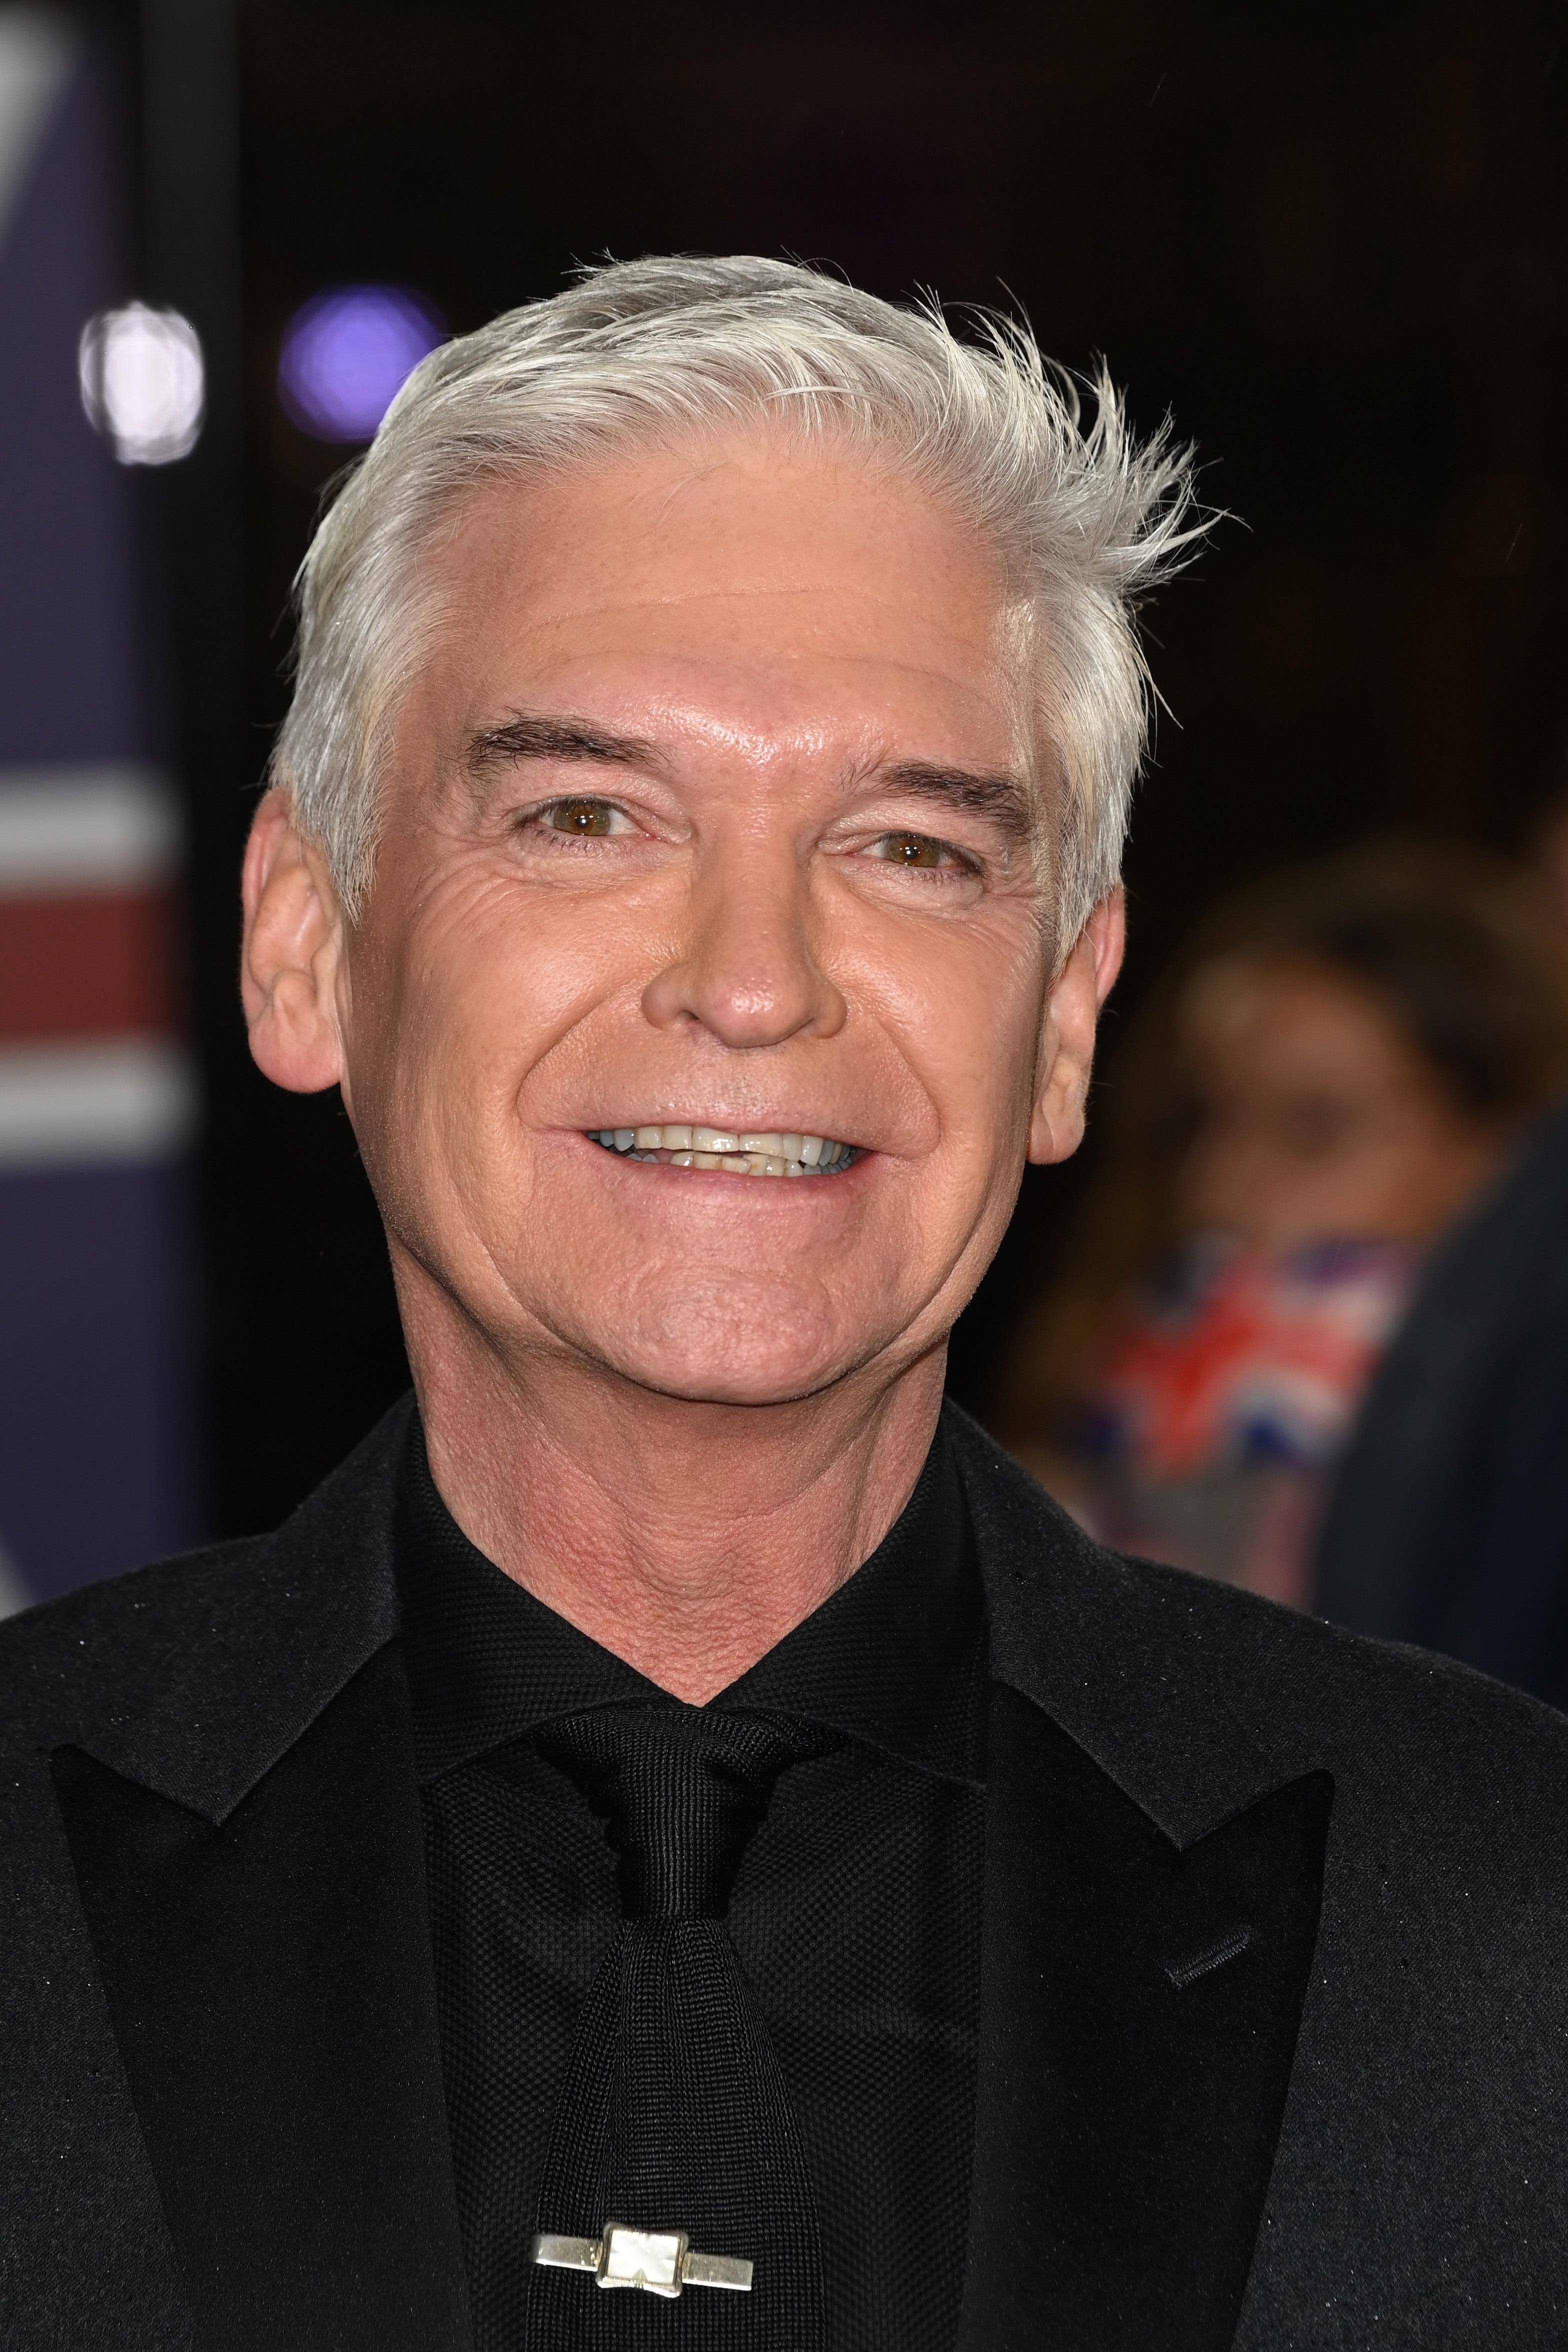 Phillip Schofield has said ‘I no longer have a brother’